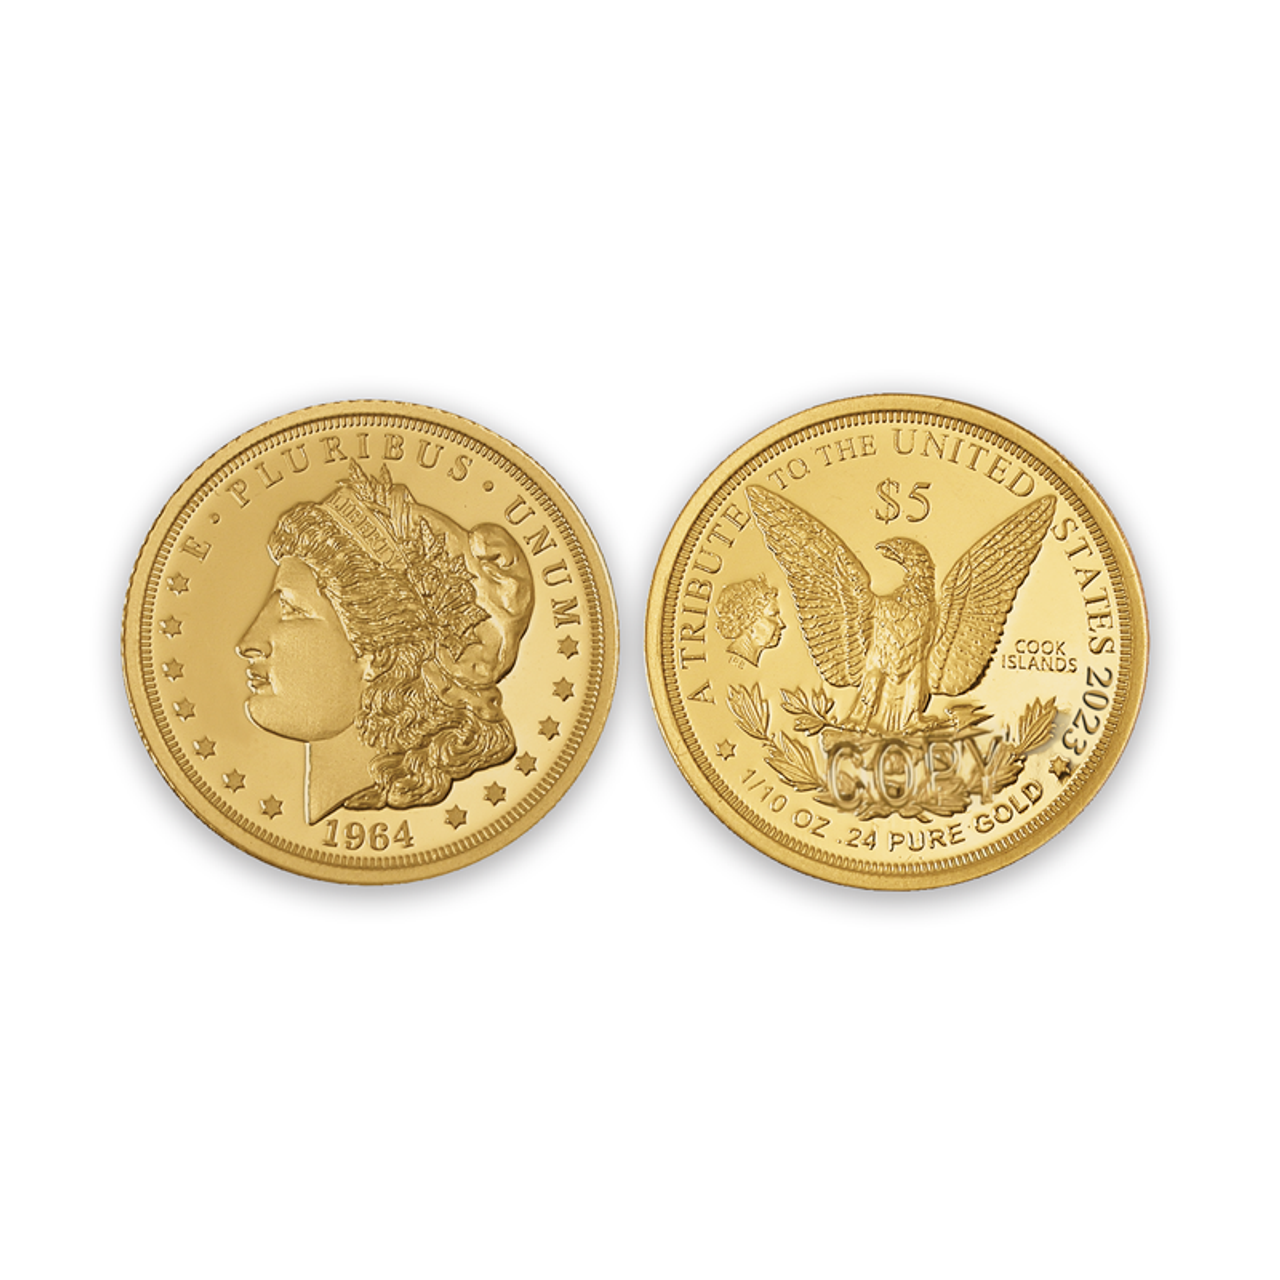 2023 .24 Pure Gold Morgan $5 Coin - National Collector's Mint